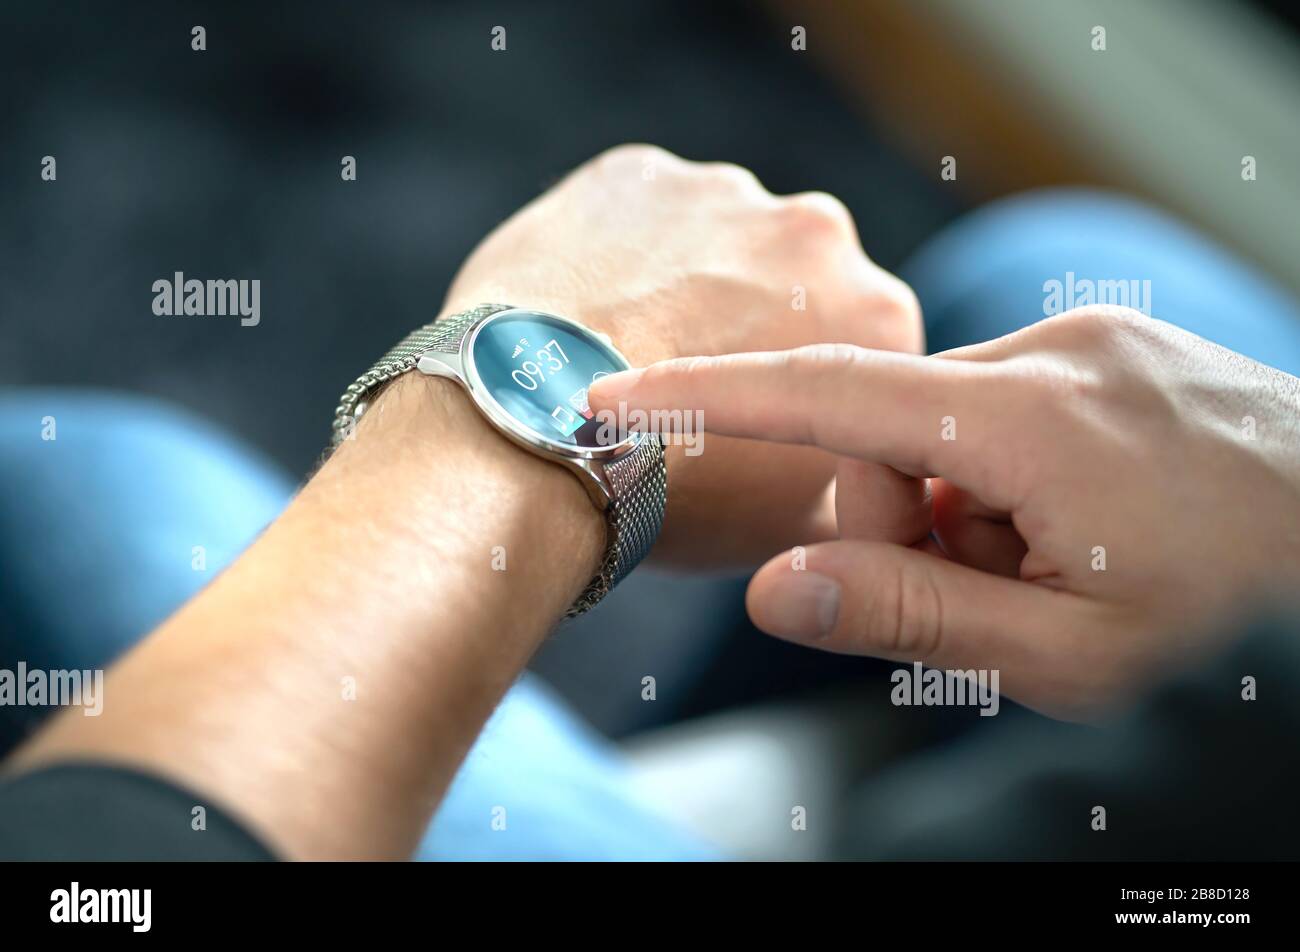 Man touching smart watch screen to open notification and read message. Wearable hybrid mobile device, gadget and activity tracker in wrist. Stock Photo